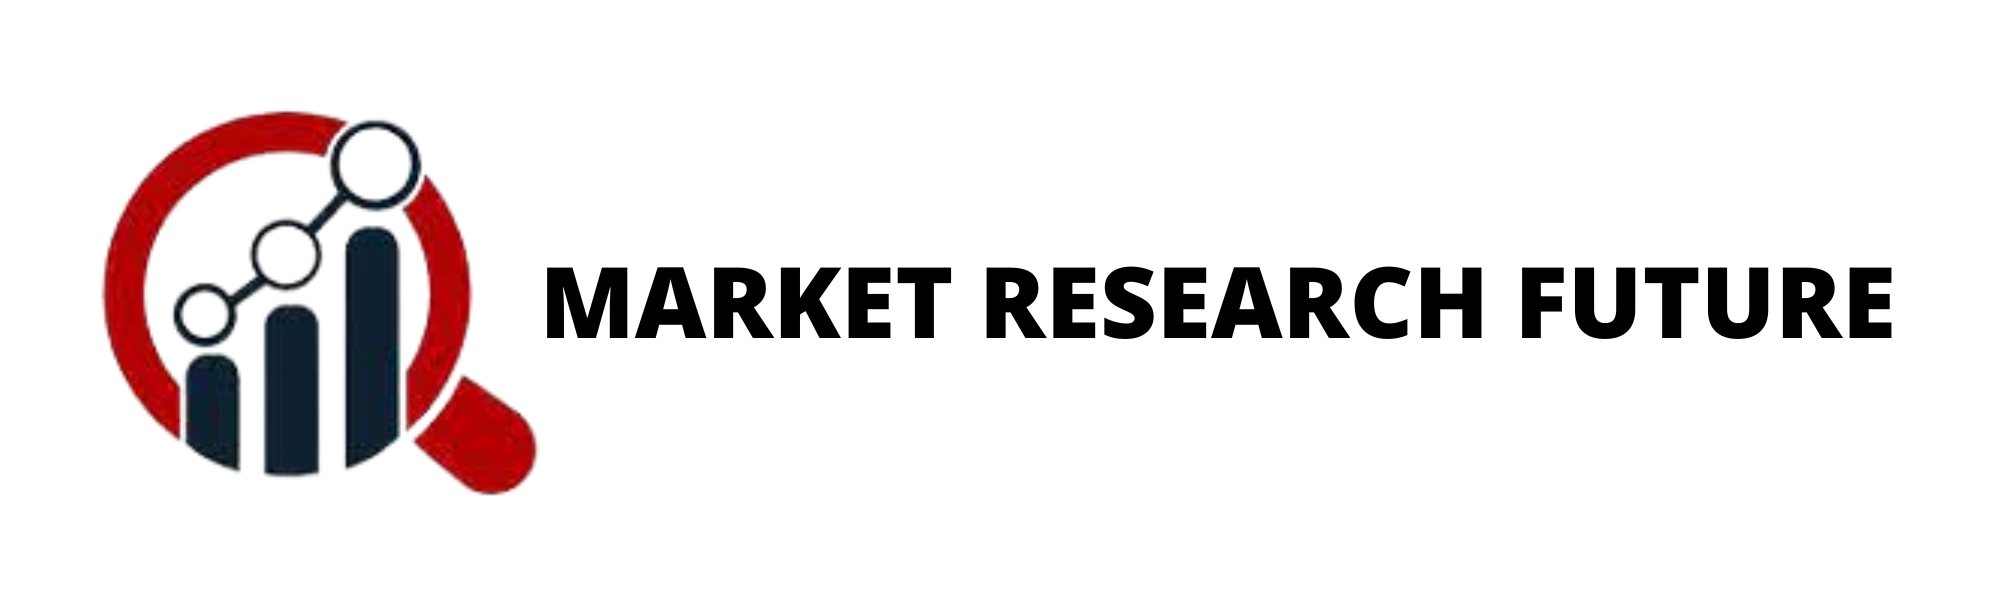 Crane Market Industry, Global Outlook, Research, Trends And...